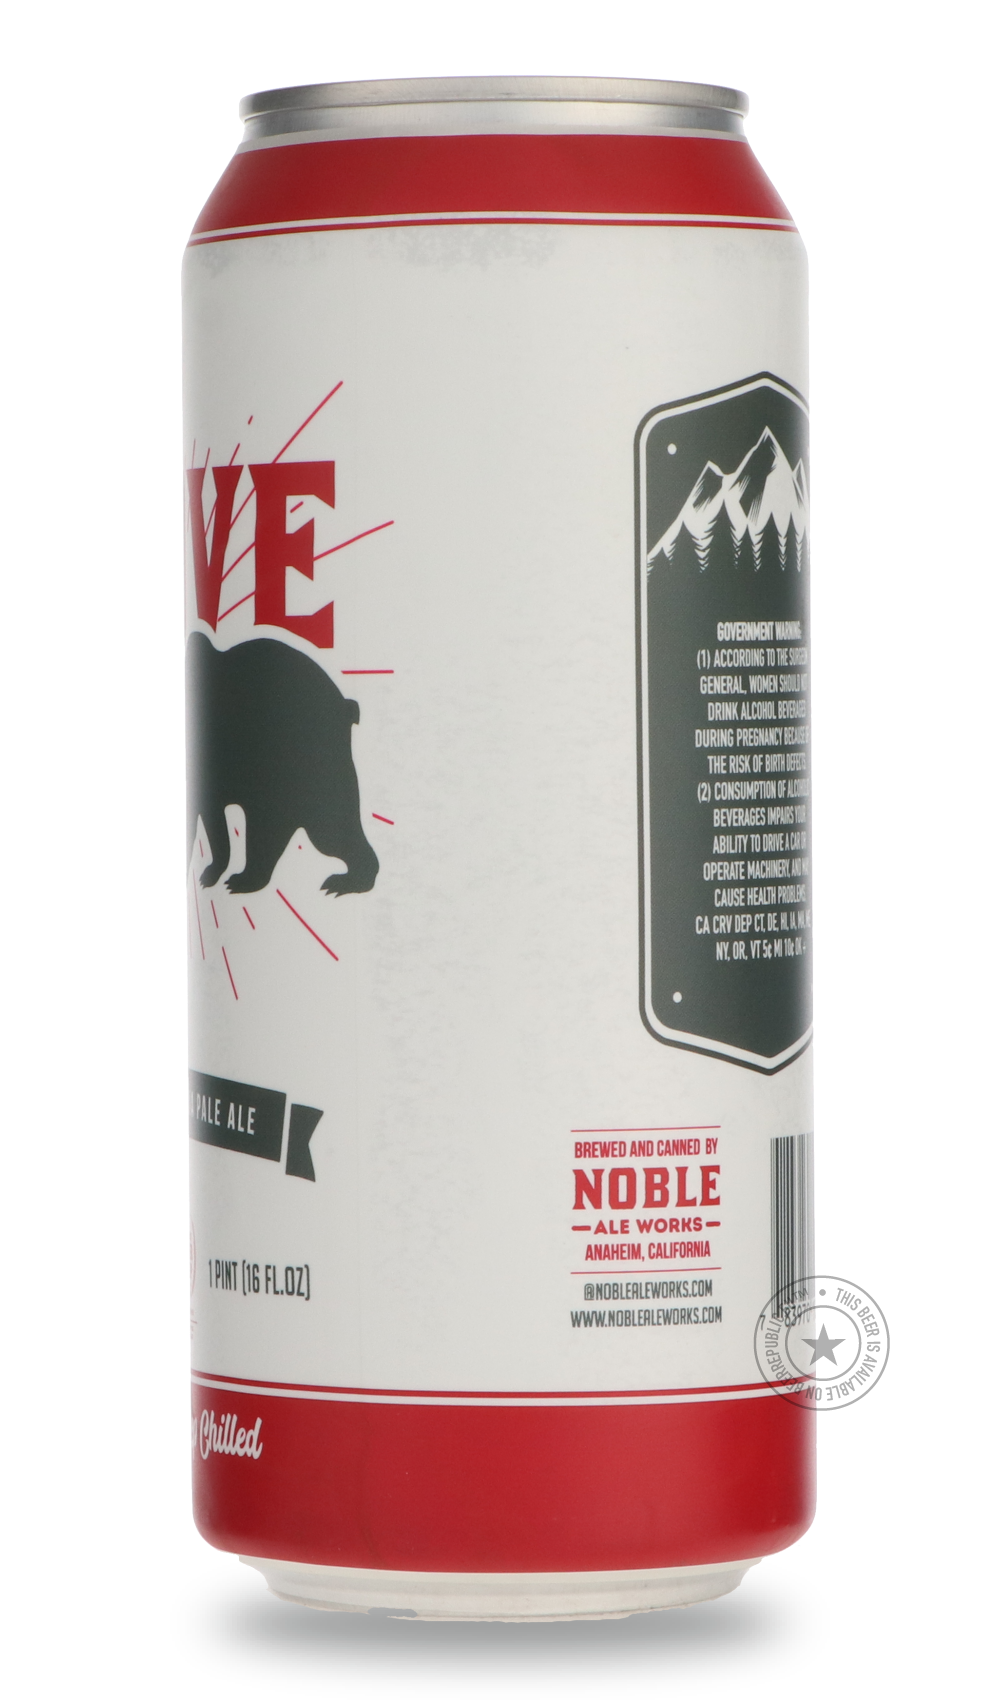 -Noble- I Love It!-IPA- Only @ Beer Republic - The best online beer store for American & Canadian craft beer - Buy beer online from the USA and Canada - Bier online kopen - Amerikaans bier kopen - Craft beer store - Craft beer kopen - Amerikanisch bier kaufen - Bier online kaufen - Acheter biere online - IPA - Stout - Porter - New England IPA - Hazy IPA - Imperial Stout - Barrel Aged - Barrel Aged Imperial Stout - Brown - Dark beer - Blond - Blonde - Pilsner - Lager - Wheat - Weizen - Amber - Barley Wine - 